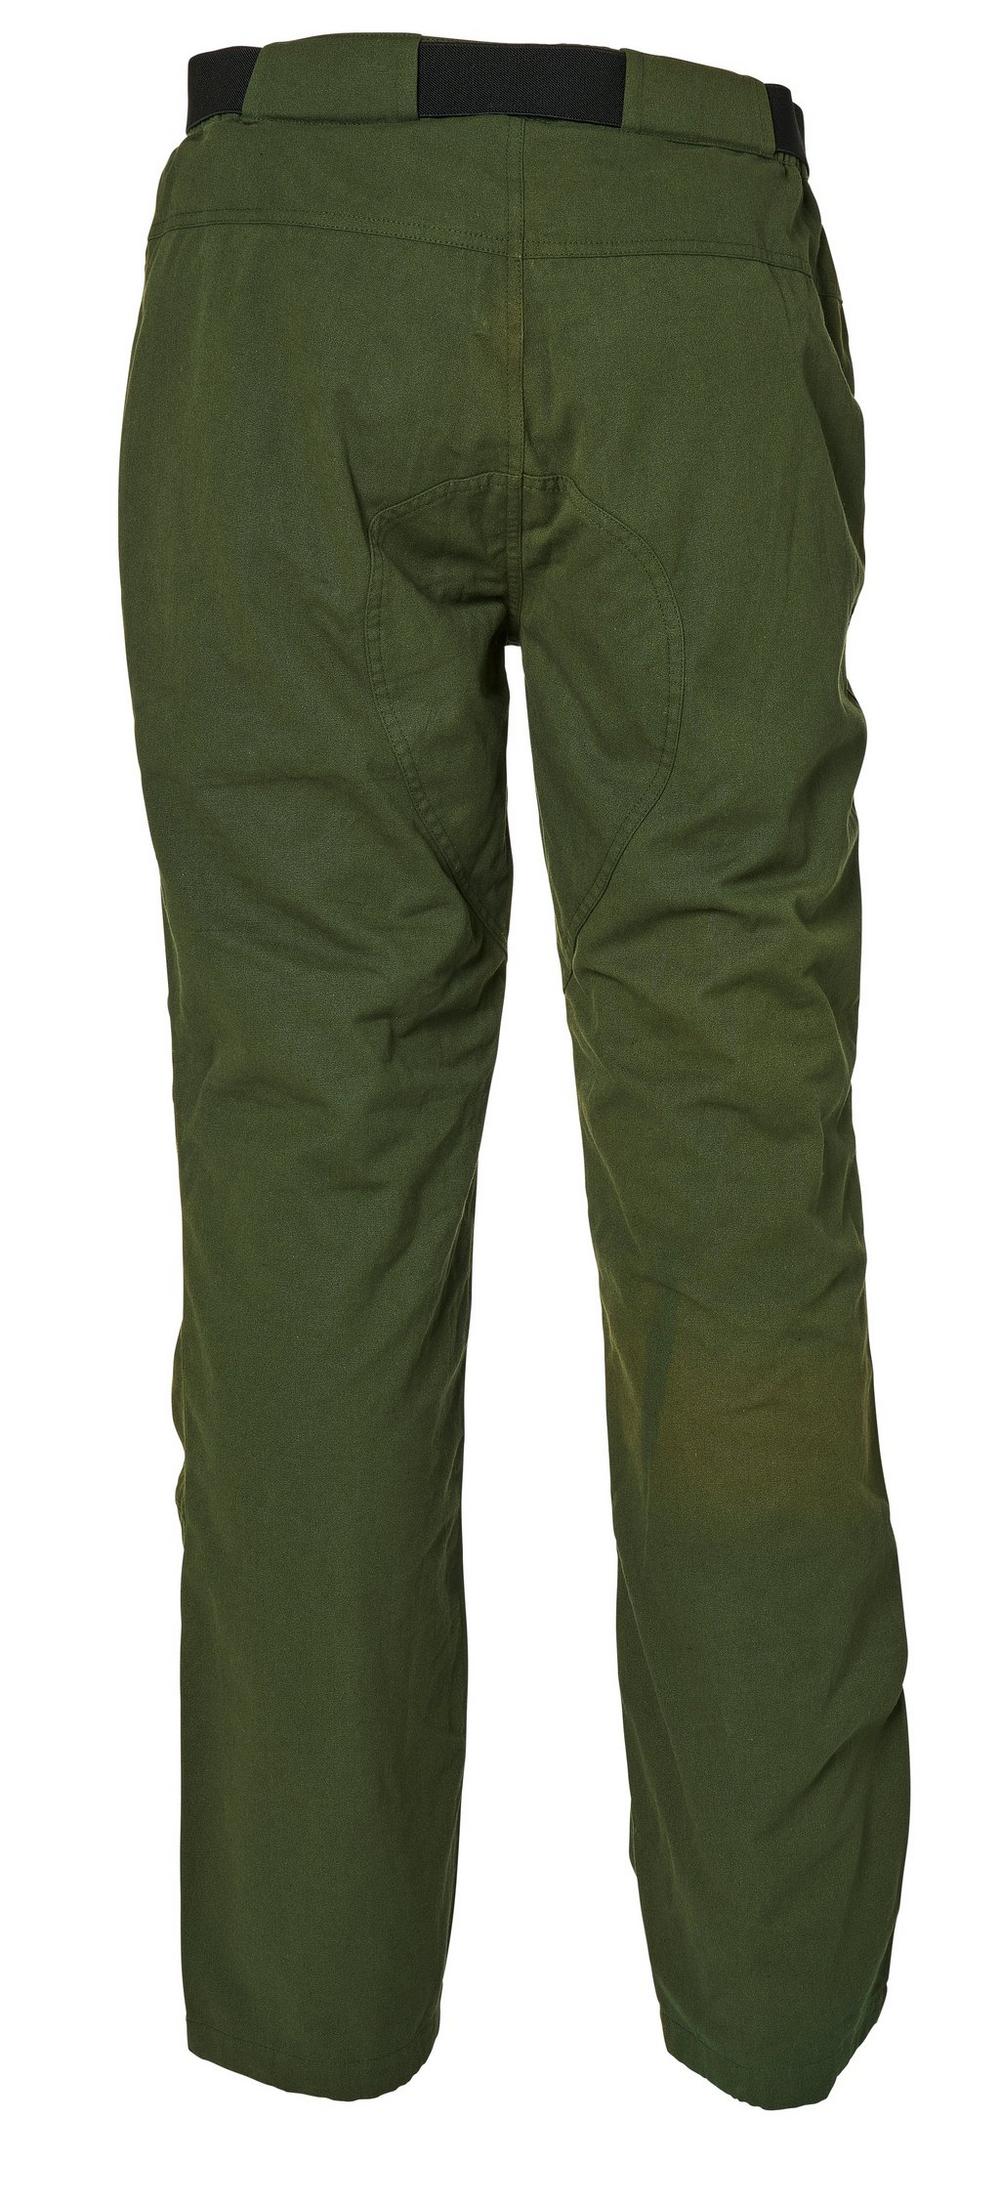 Prologic Combat Trousers Army Green